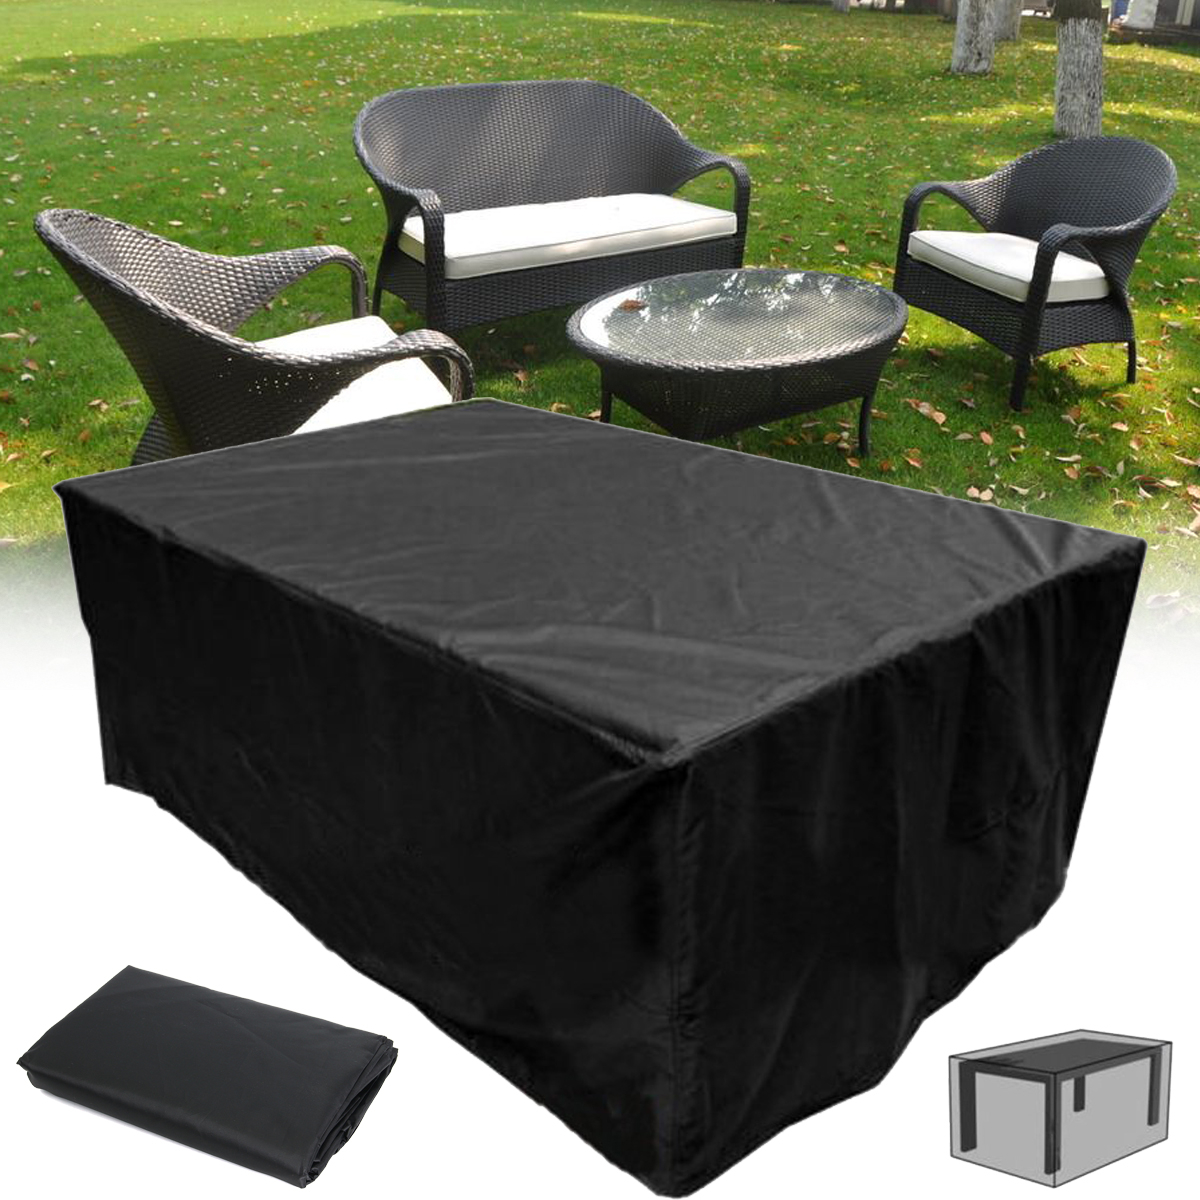 Details About Heavy Duty Furniture Cover Waterproof Garden Patio Table Outdoor Shelter 9 Size pertaining to proportions 1200 X 1200